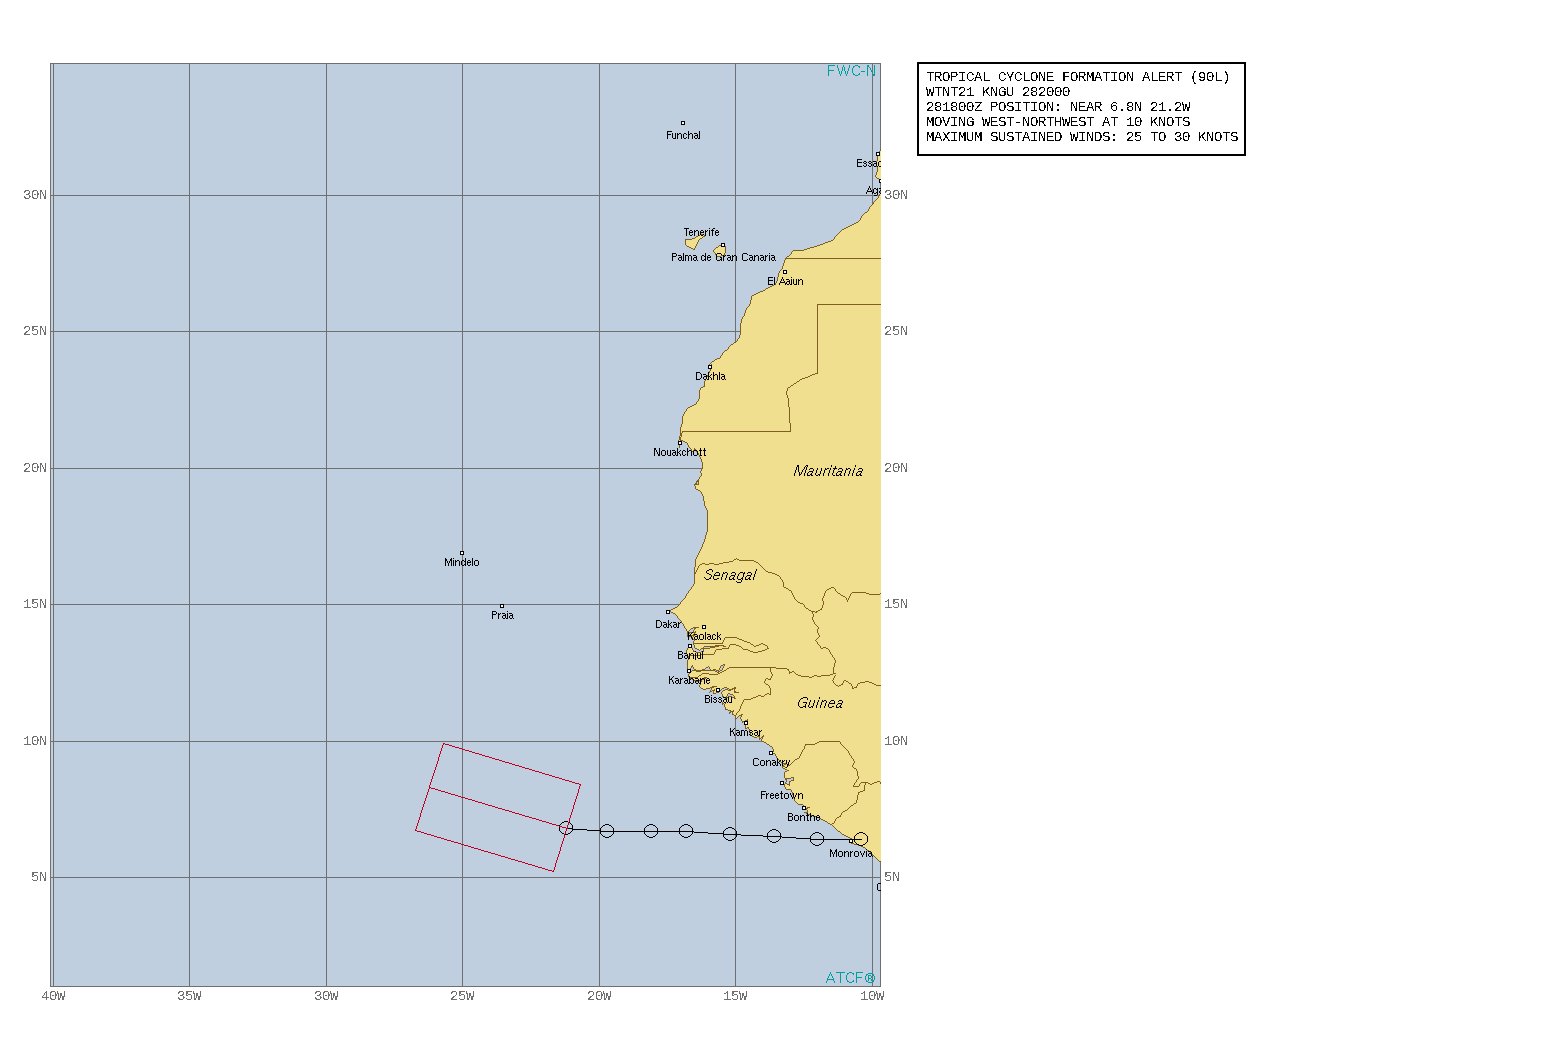 FORMATION OF A SIGNIFICANT TROPICAL CYCLONE IS POSSIBLE  WITHIN 100 NM EITHER SIDE OF A LINE FROM 6.8N 21.2W TO 8.3N 26.2W  WITHIN THE NEXT 24 HOURS. AVAILABLE DATA DOES NOT JUSTIFY ISSUANCE OF NUMBERED TROPICAL CYCLONE WARNINGS AT THIS TIME. WINDS IN THE AREA ARE ESTIMATED TO BE 25 TO 30 KNOTS. METSAT IMAGERY AT 281800Z INDICATES THAT A CIRCULATION CENTER IS LOCATED NEAR 6.8N 21.2W. THE SYSTEM IS MOVING WEST-NORTHWEST AT 8-12 KNOTS. 2. REMARKS: A BROAD AREA OF LOW PRESSURE LOCATED OVER THE FAR  EASTERN ATLANTIC, SEVERAL HUNDRED MILES SOUTH-SOUTHEAST OF THE CABO VERDE ISLANDS, IS PRODUCING A LARGE AREA OF SHOWERS AND  THUNDERSTORMS. THIS SHOWER ACTIVITY IS GRADUALLY BECOMING BETTER ORGANIZED AND A TROPICAL DEPRESSION IS EXPECTED TO FORM IN THE NEXT 24 HOURS.